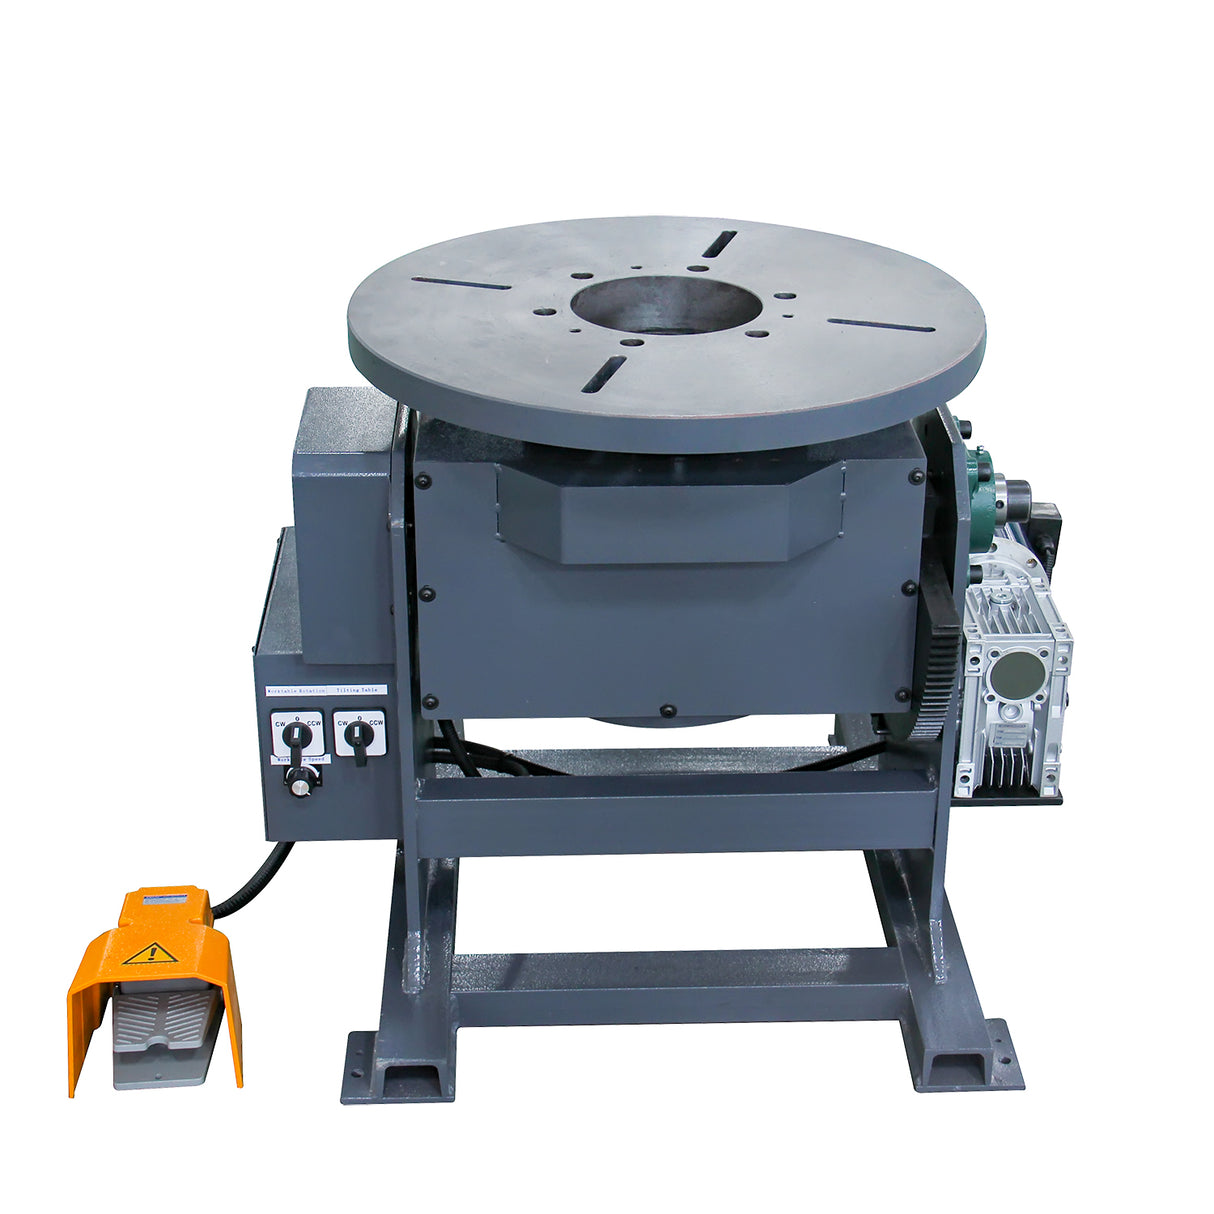 KANG Industrial WP-500T Welding Positioner Rotating Table for Welding, 68mm Chuck Hole